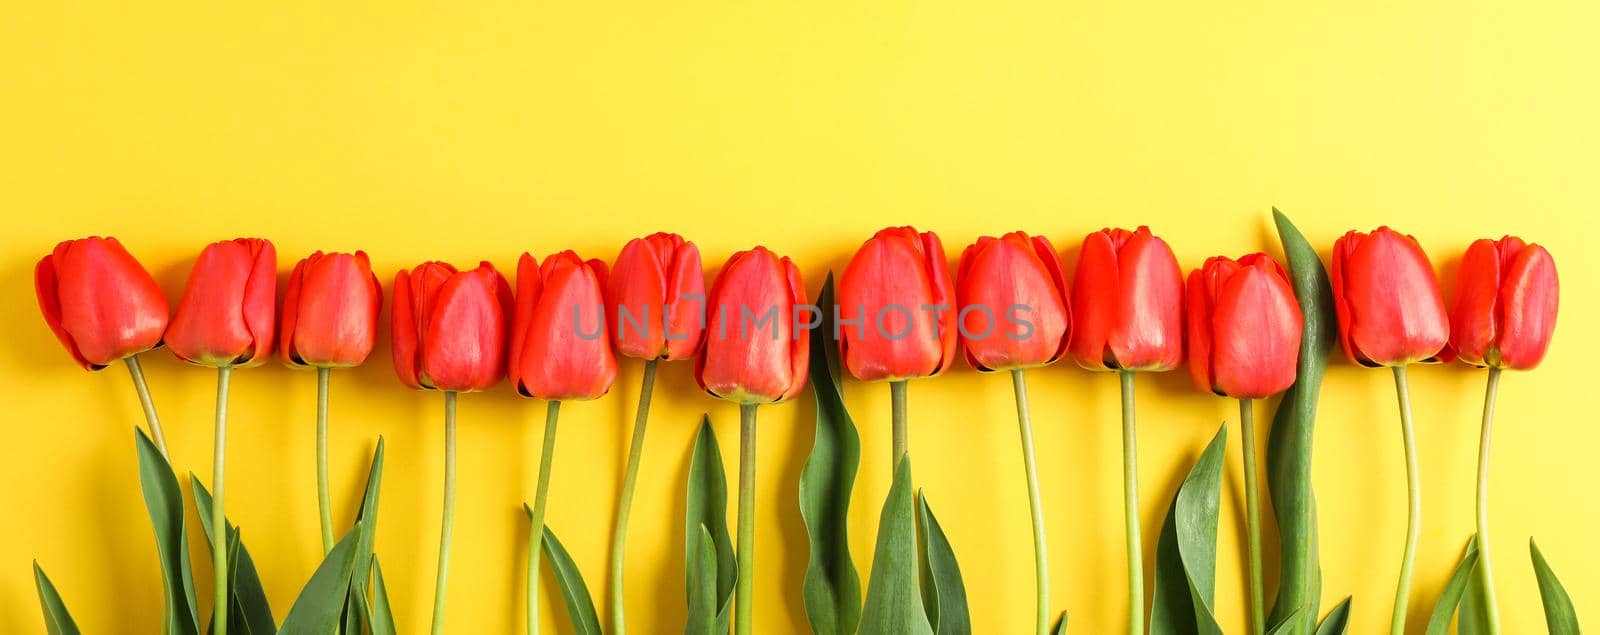 Many beautiful red tulips with green leaves on yellow background, space for text by AtlasCompany